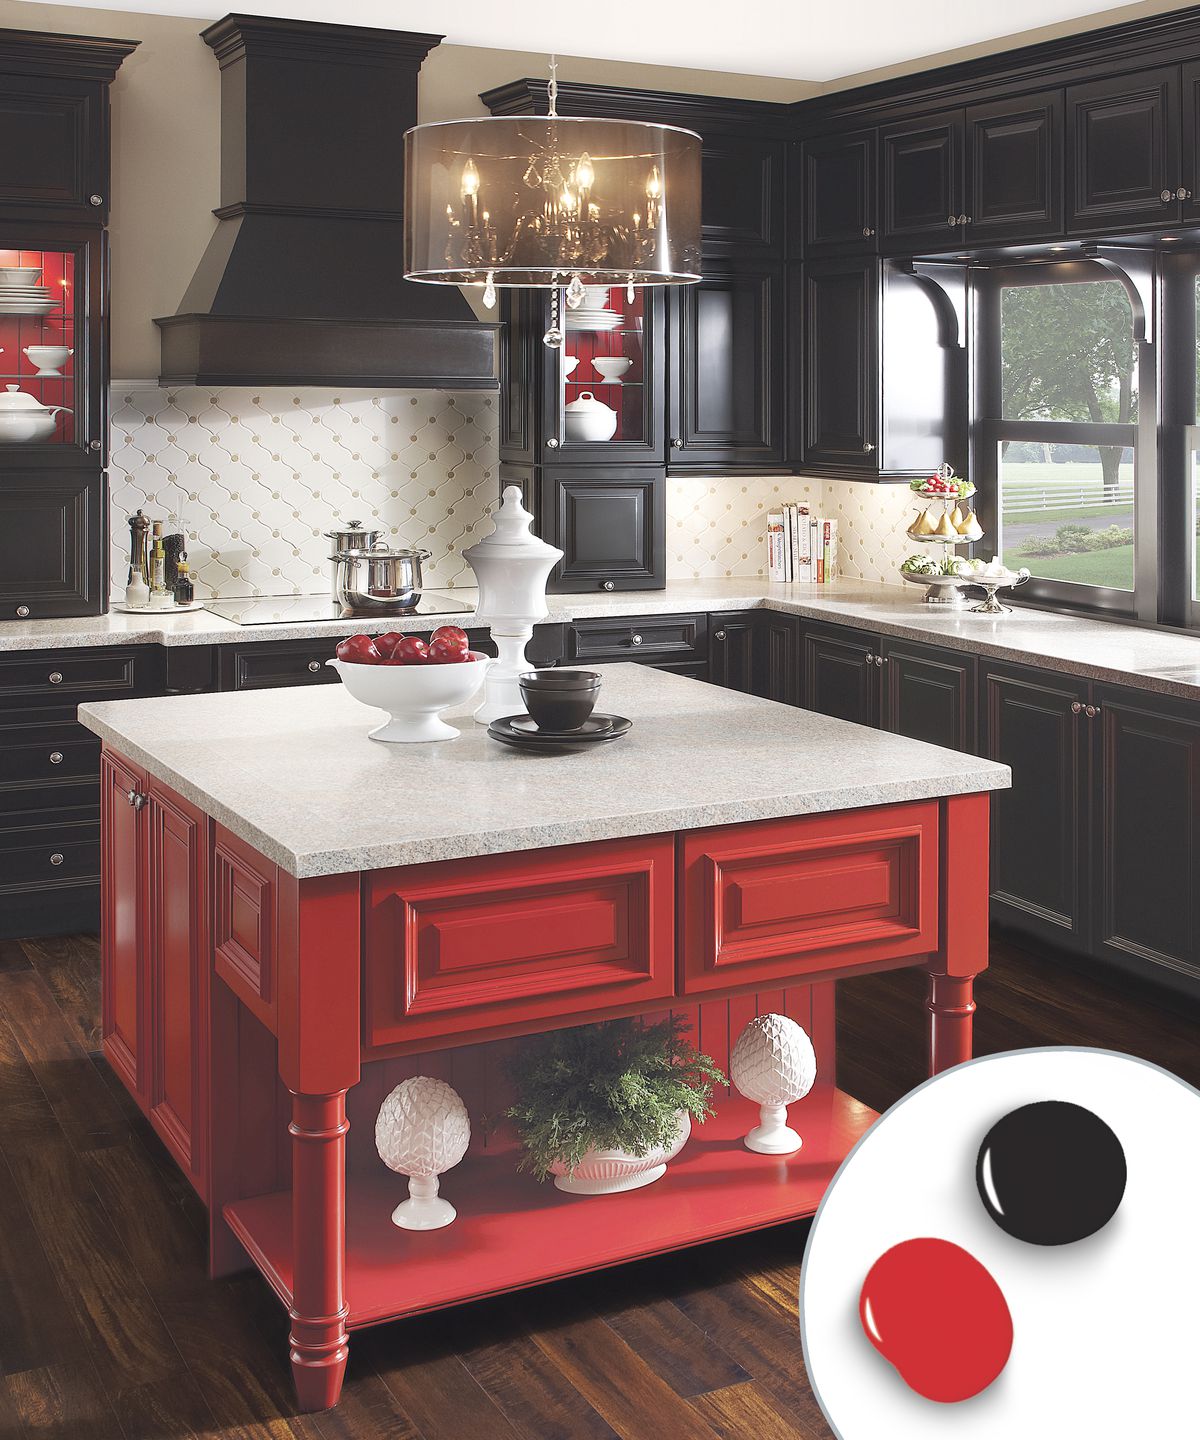 12 Kitchen Cabinet Color Ideas Two Tone Combinations This Old House